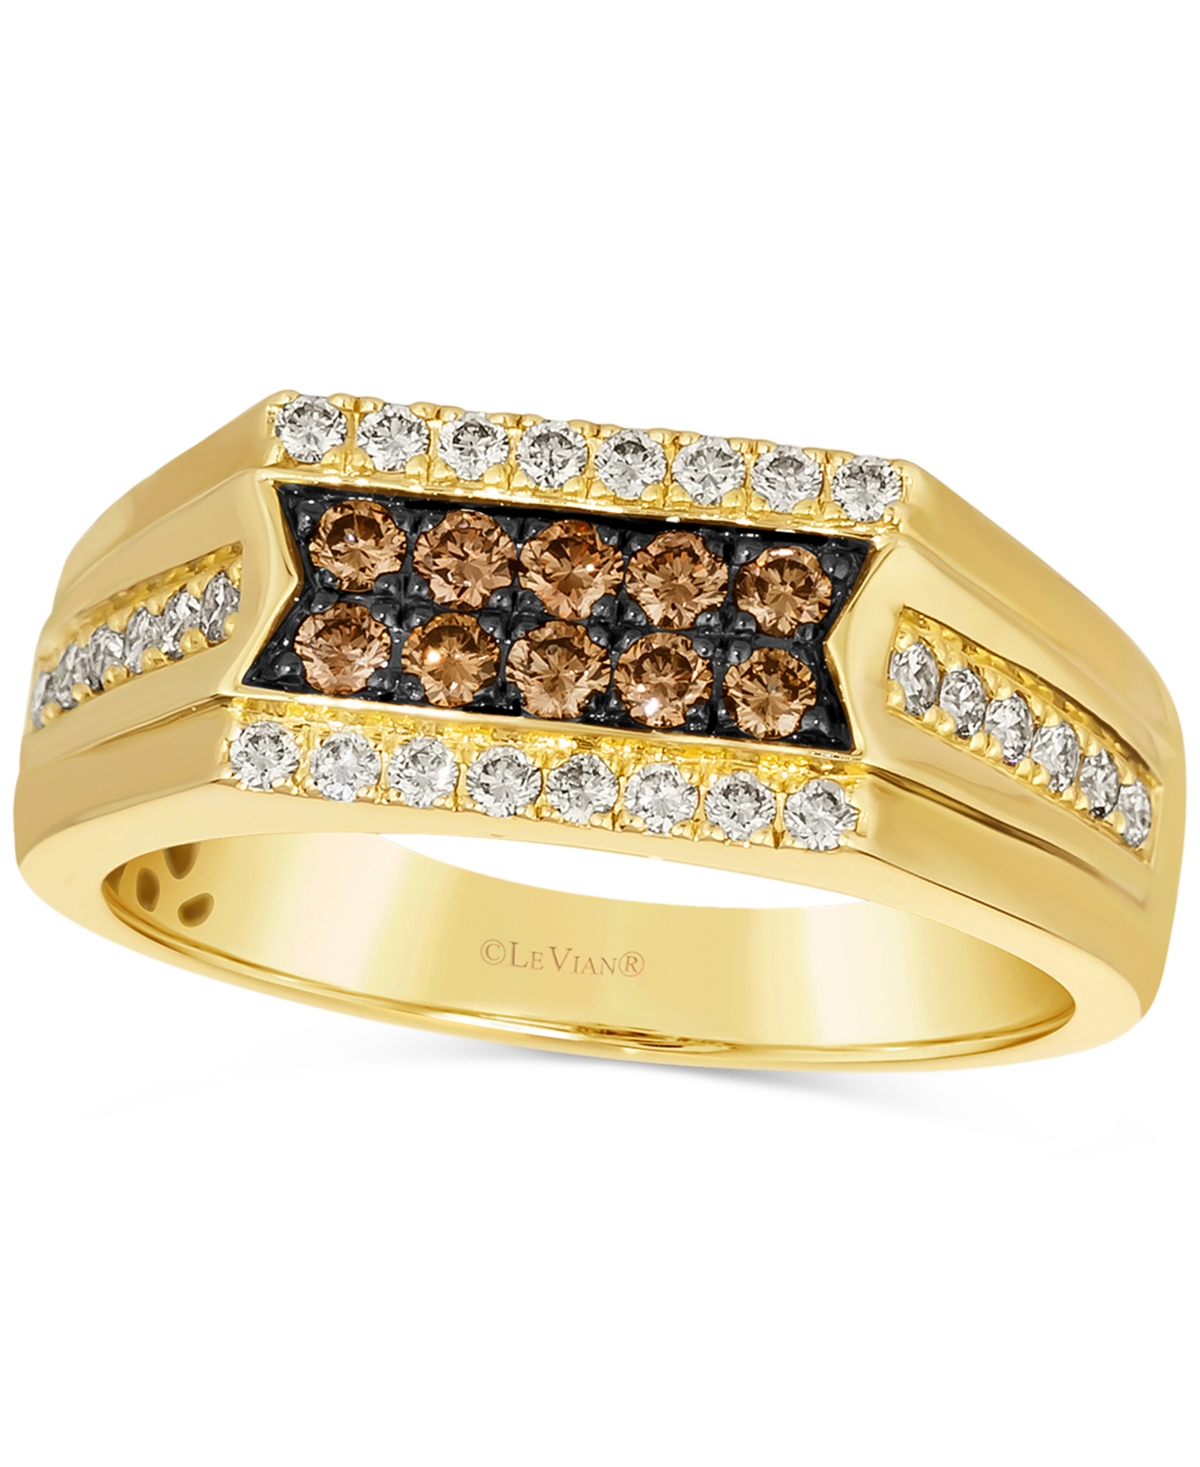 Men's Chocolate Diamond (1/3 ct. t.w.) & Nude Diamond (3/8 ct. t.w.) Cluster Ring in 14k Gold - Yellow Gold